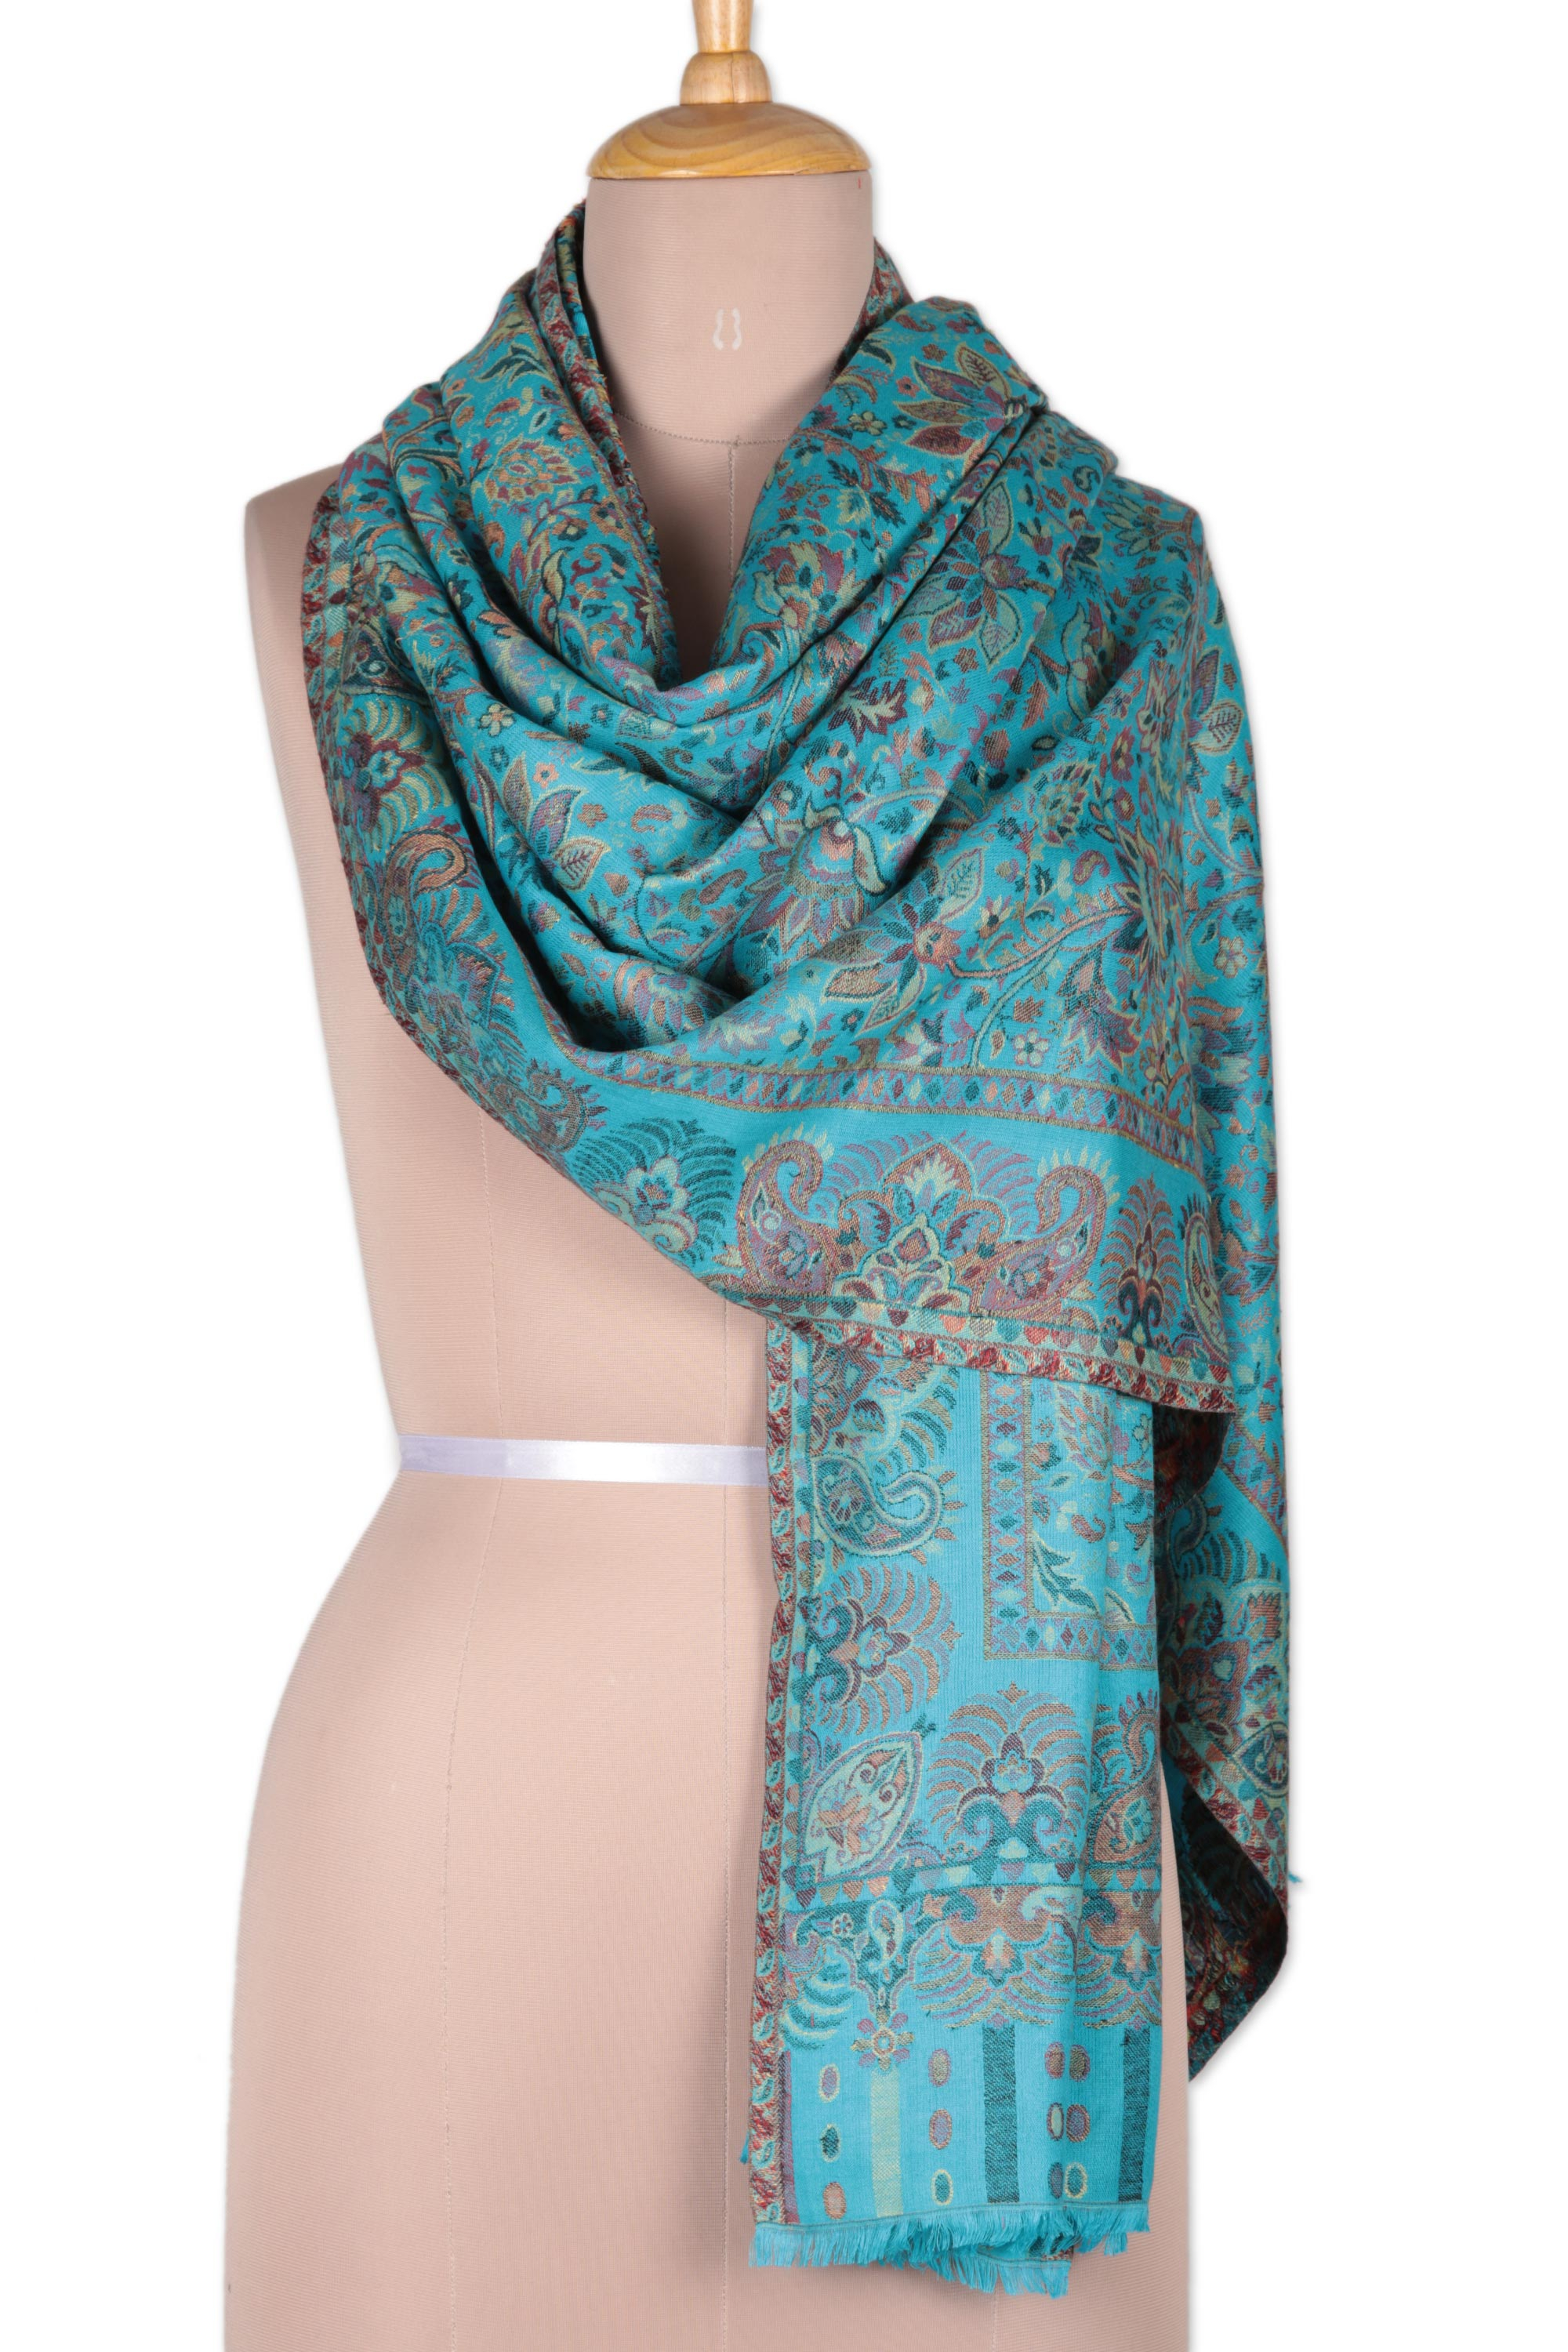 UNICEF Market | Jacquard Paisley and Floral Shawl in Turquoise ...